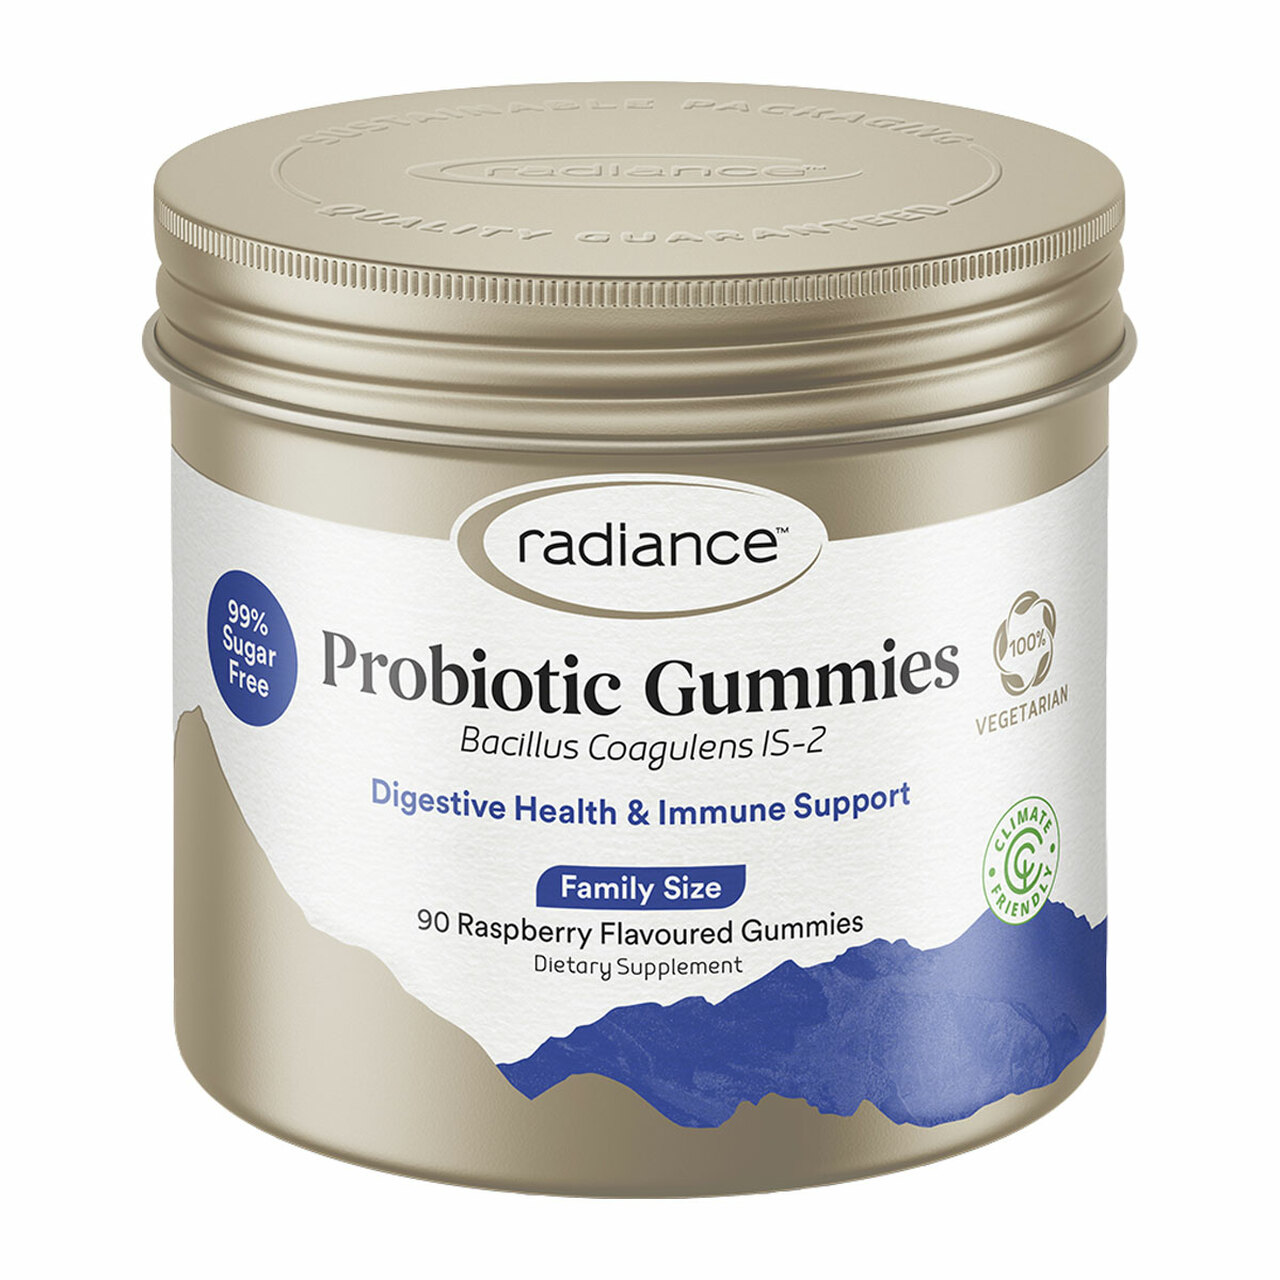 radiance-sugar-free-probiotic-gummies-for-adults-rdgp9-front__51419.1620261676